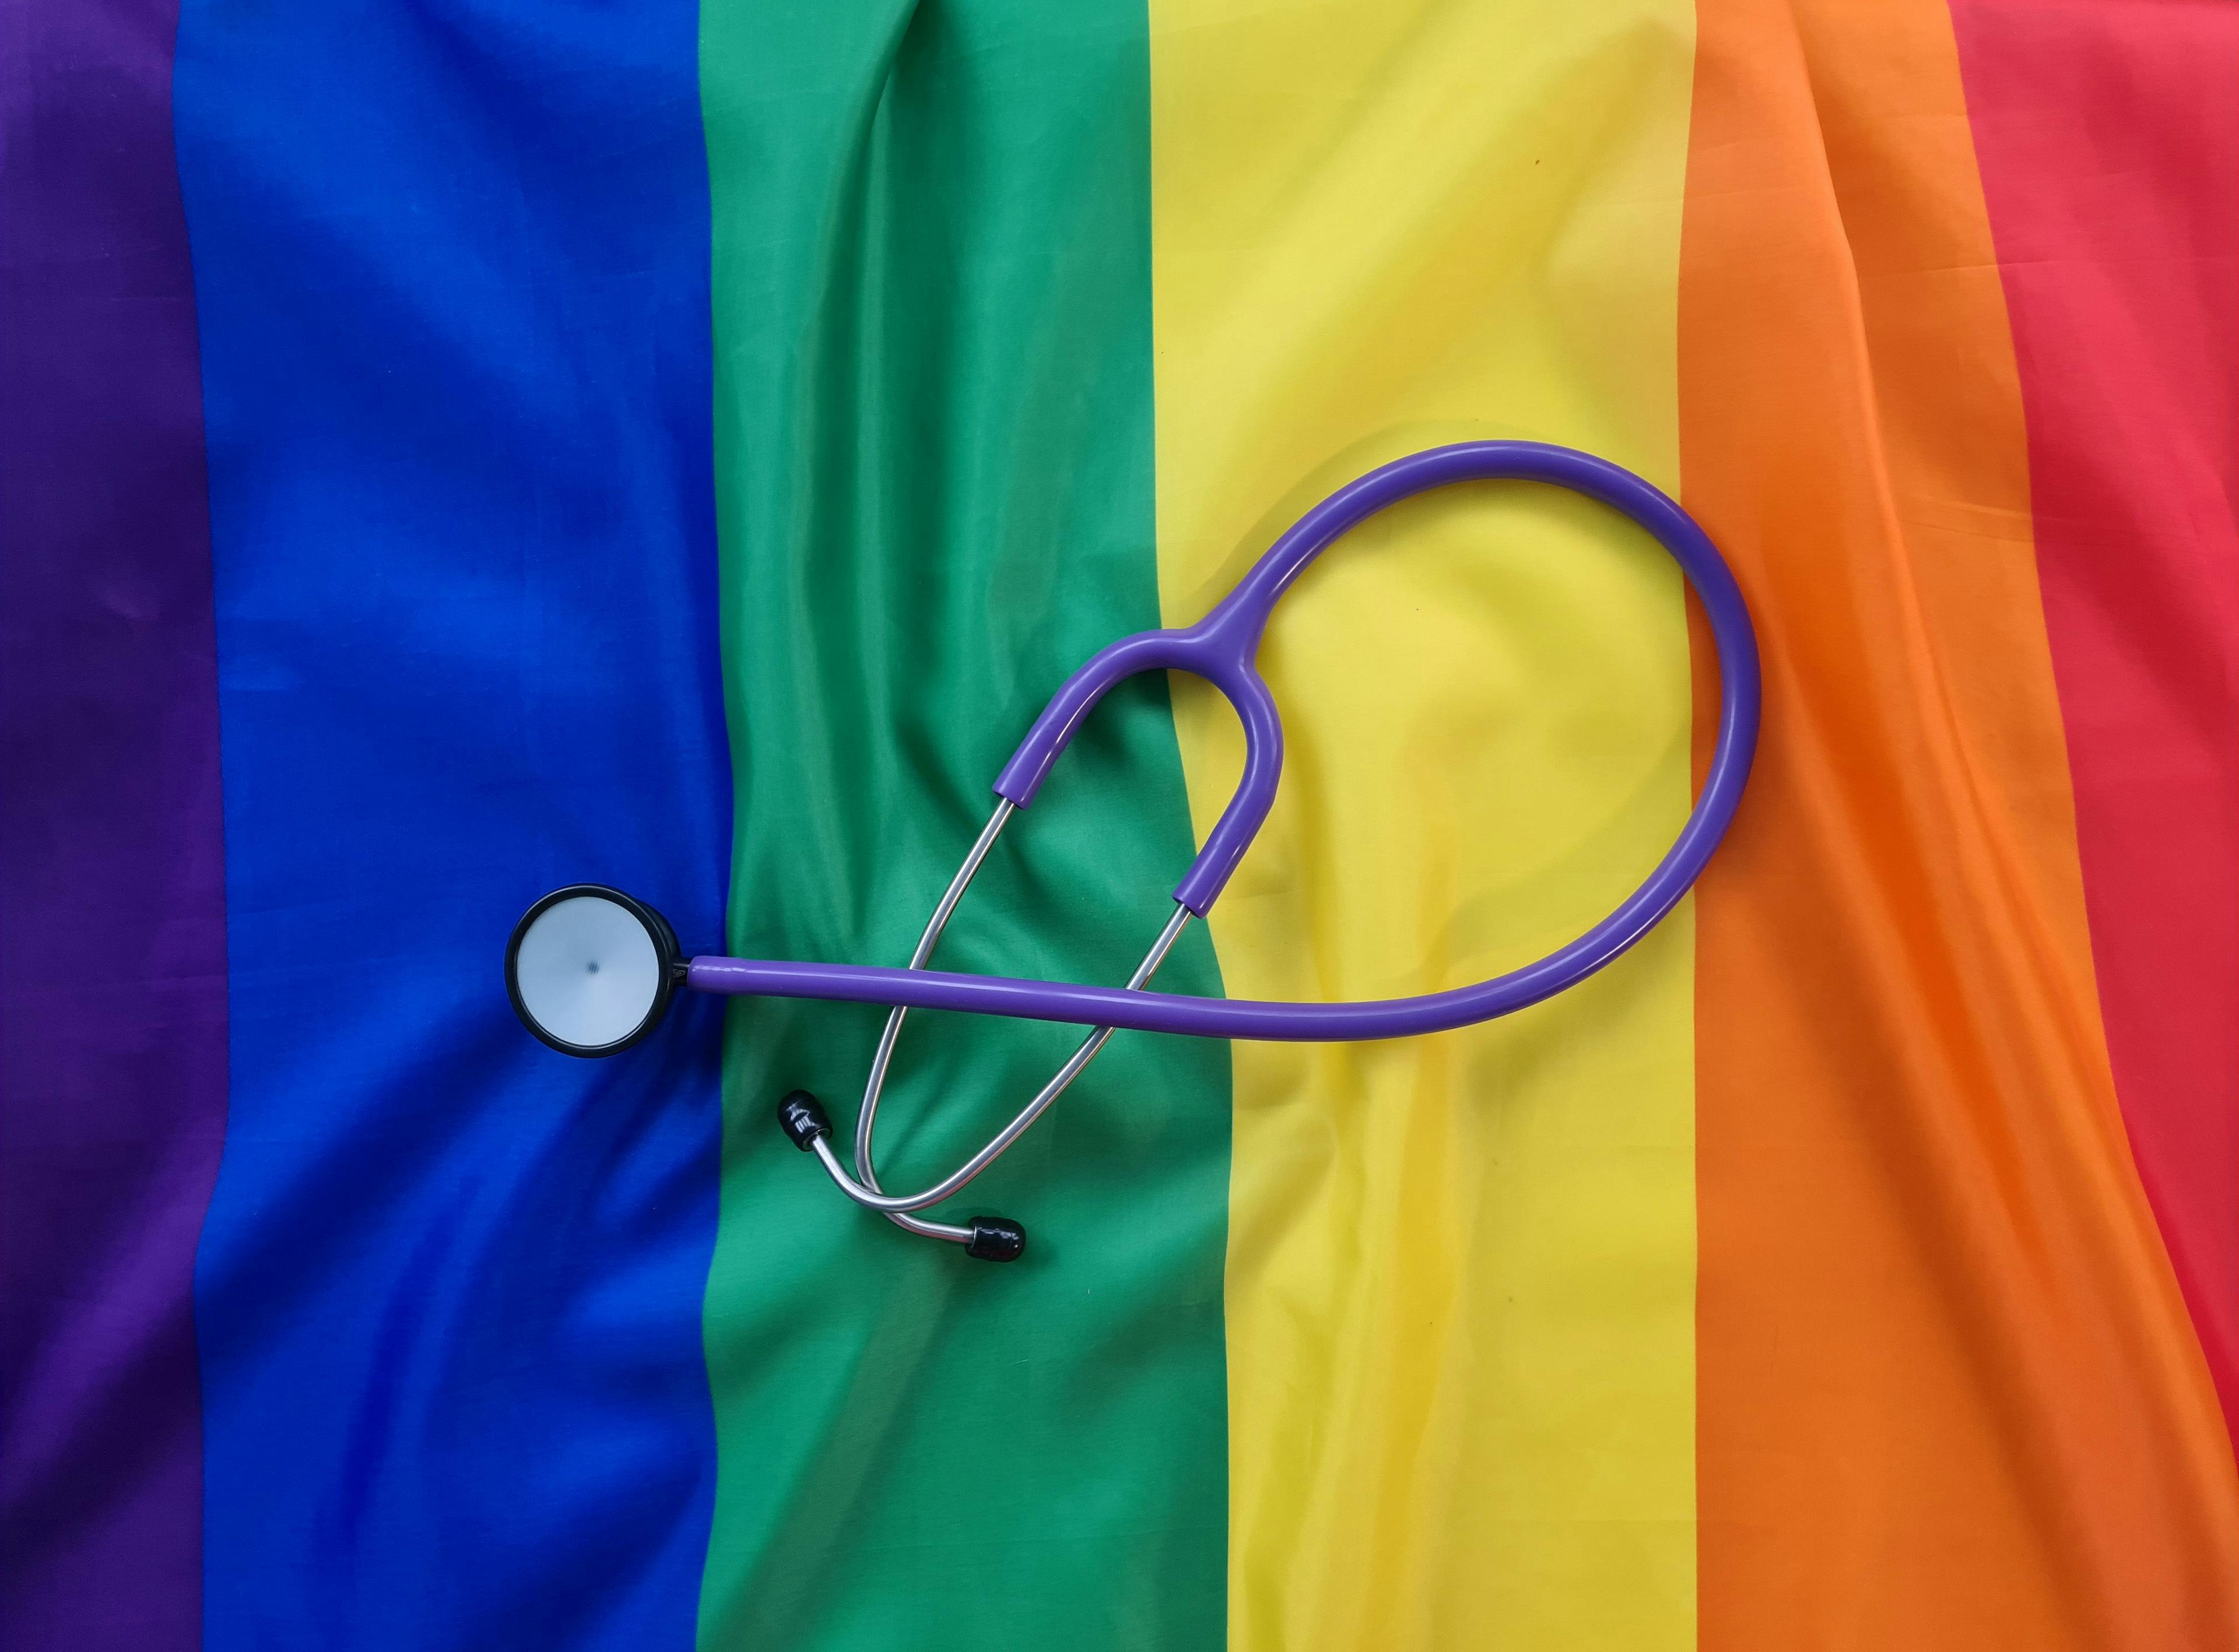 Dermatologists Play Crucial Role in Support and Inclusivity of Transgender and Gender-Diverse Patients